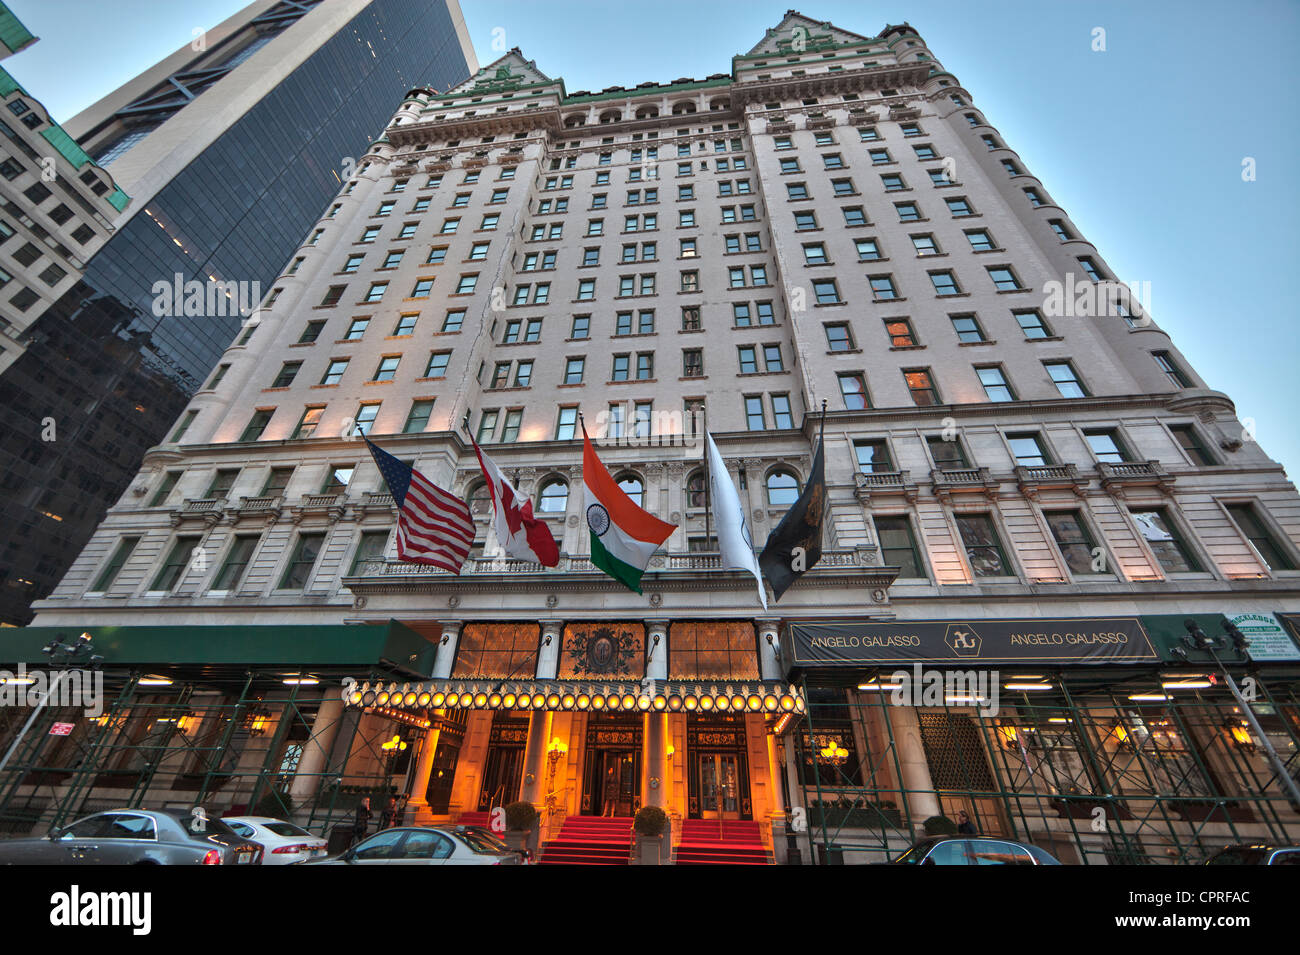 The Plaza Hotel owned by Fairmont Hotels in Manhattan, New York City Stock Photo